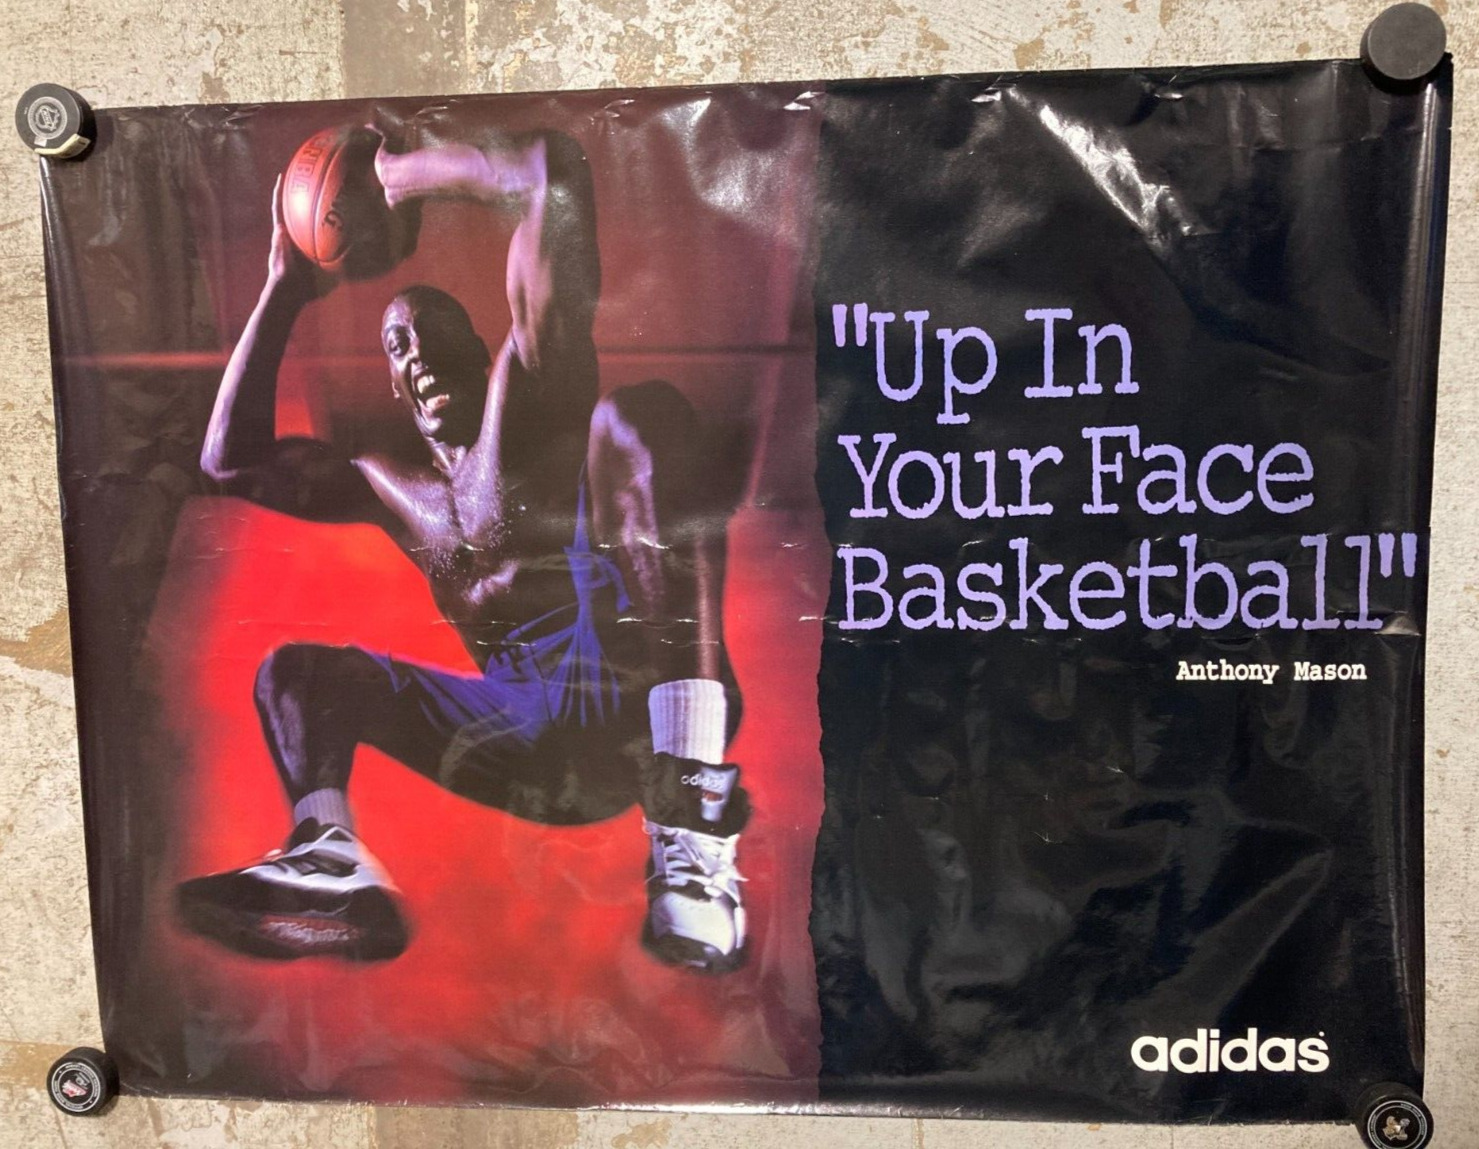 VINTAGE ADIDAS-NBA-ANTHONY MASON-UP IN YOUR FACE BASKETBALL* 44.5X58 POSTER PB24